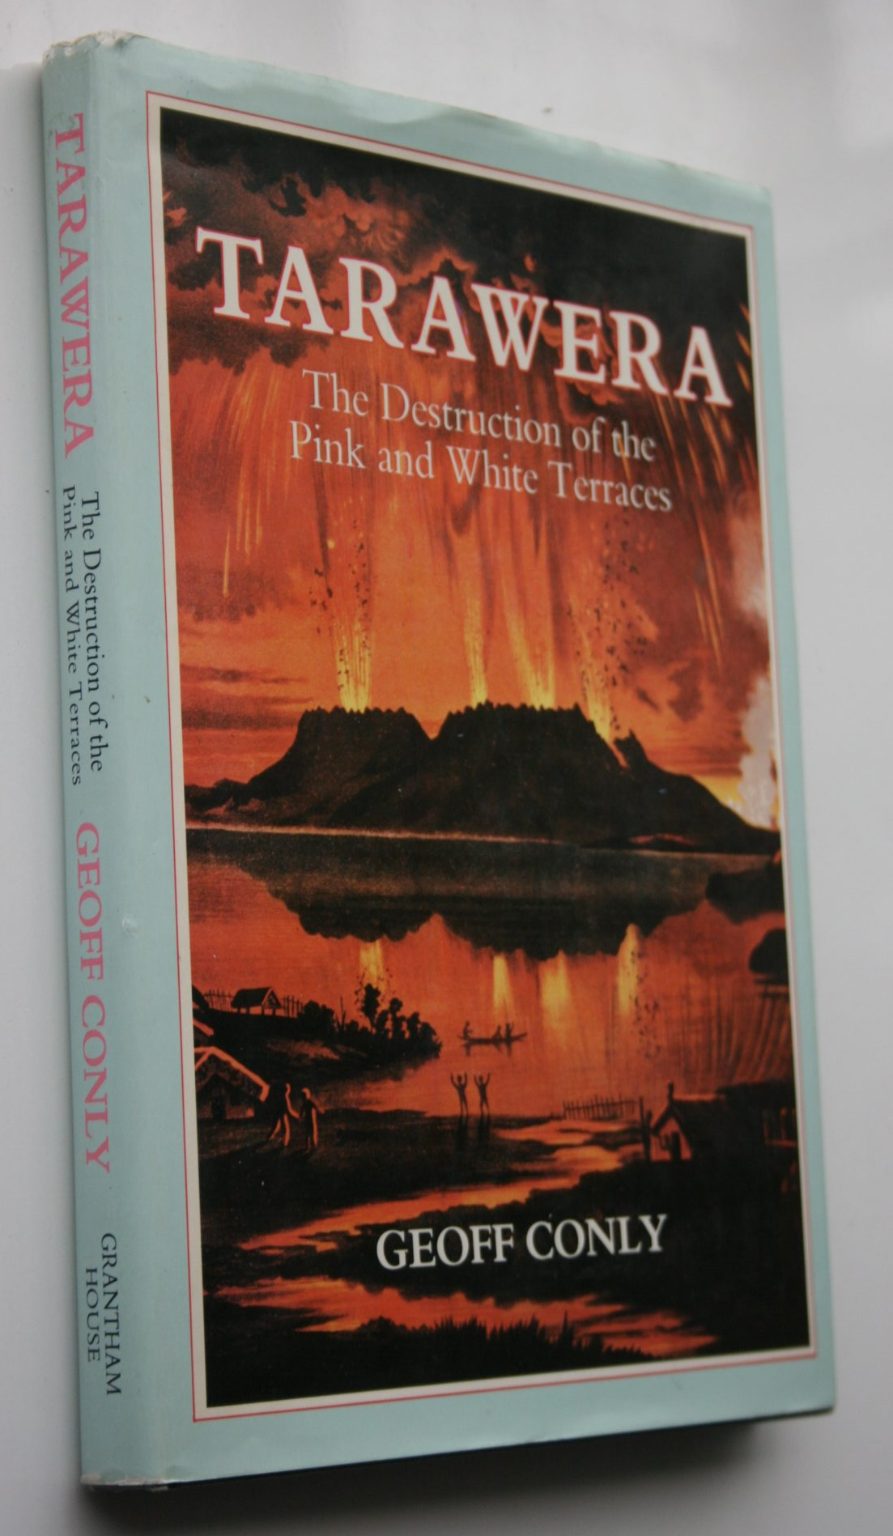 Tarawera The Destruction of the Pink and White Terraces by Geoff Conly.